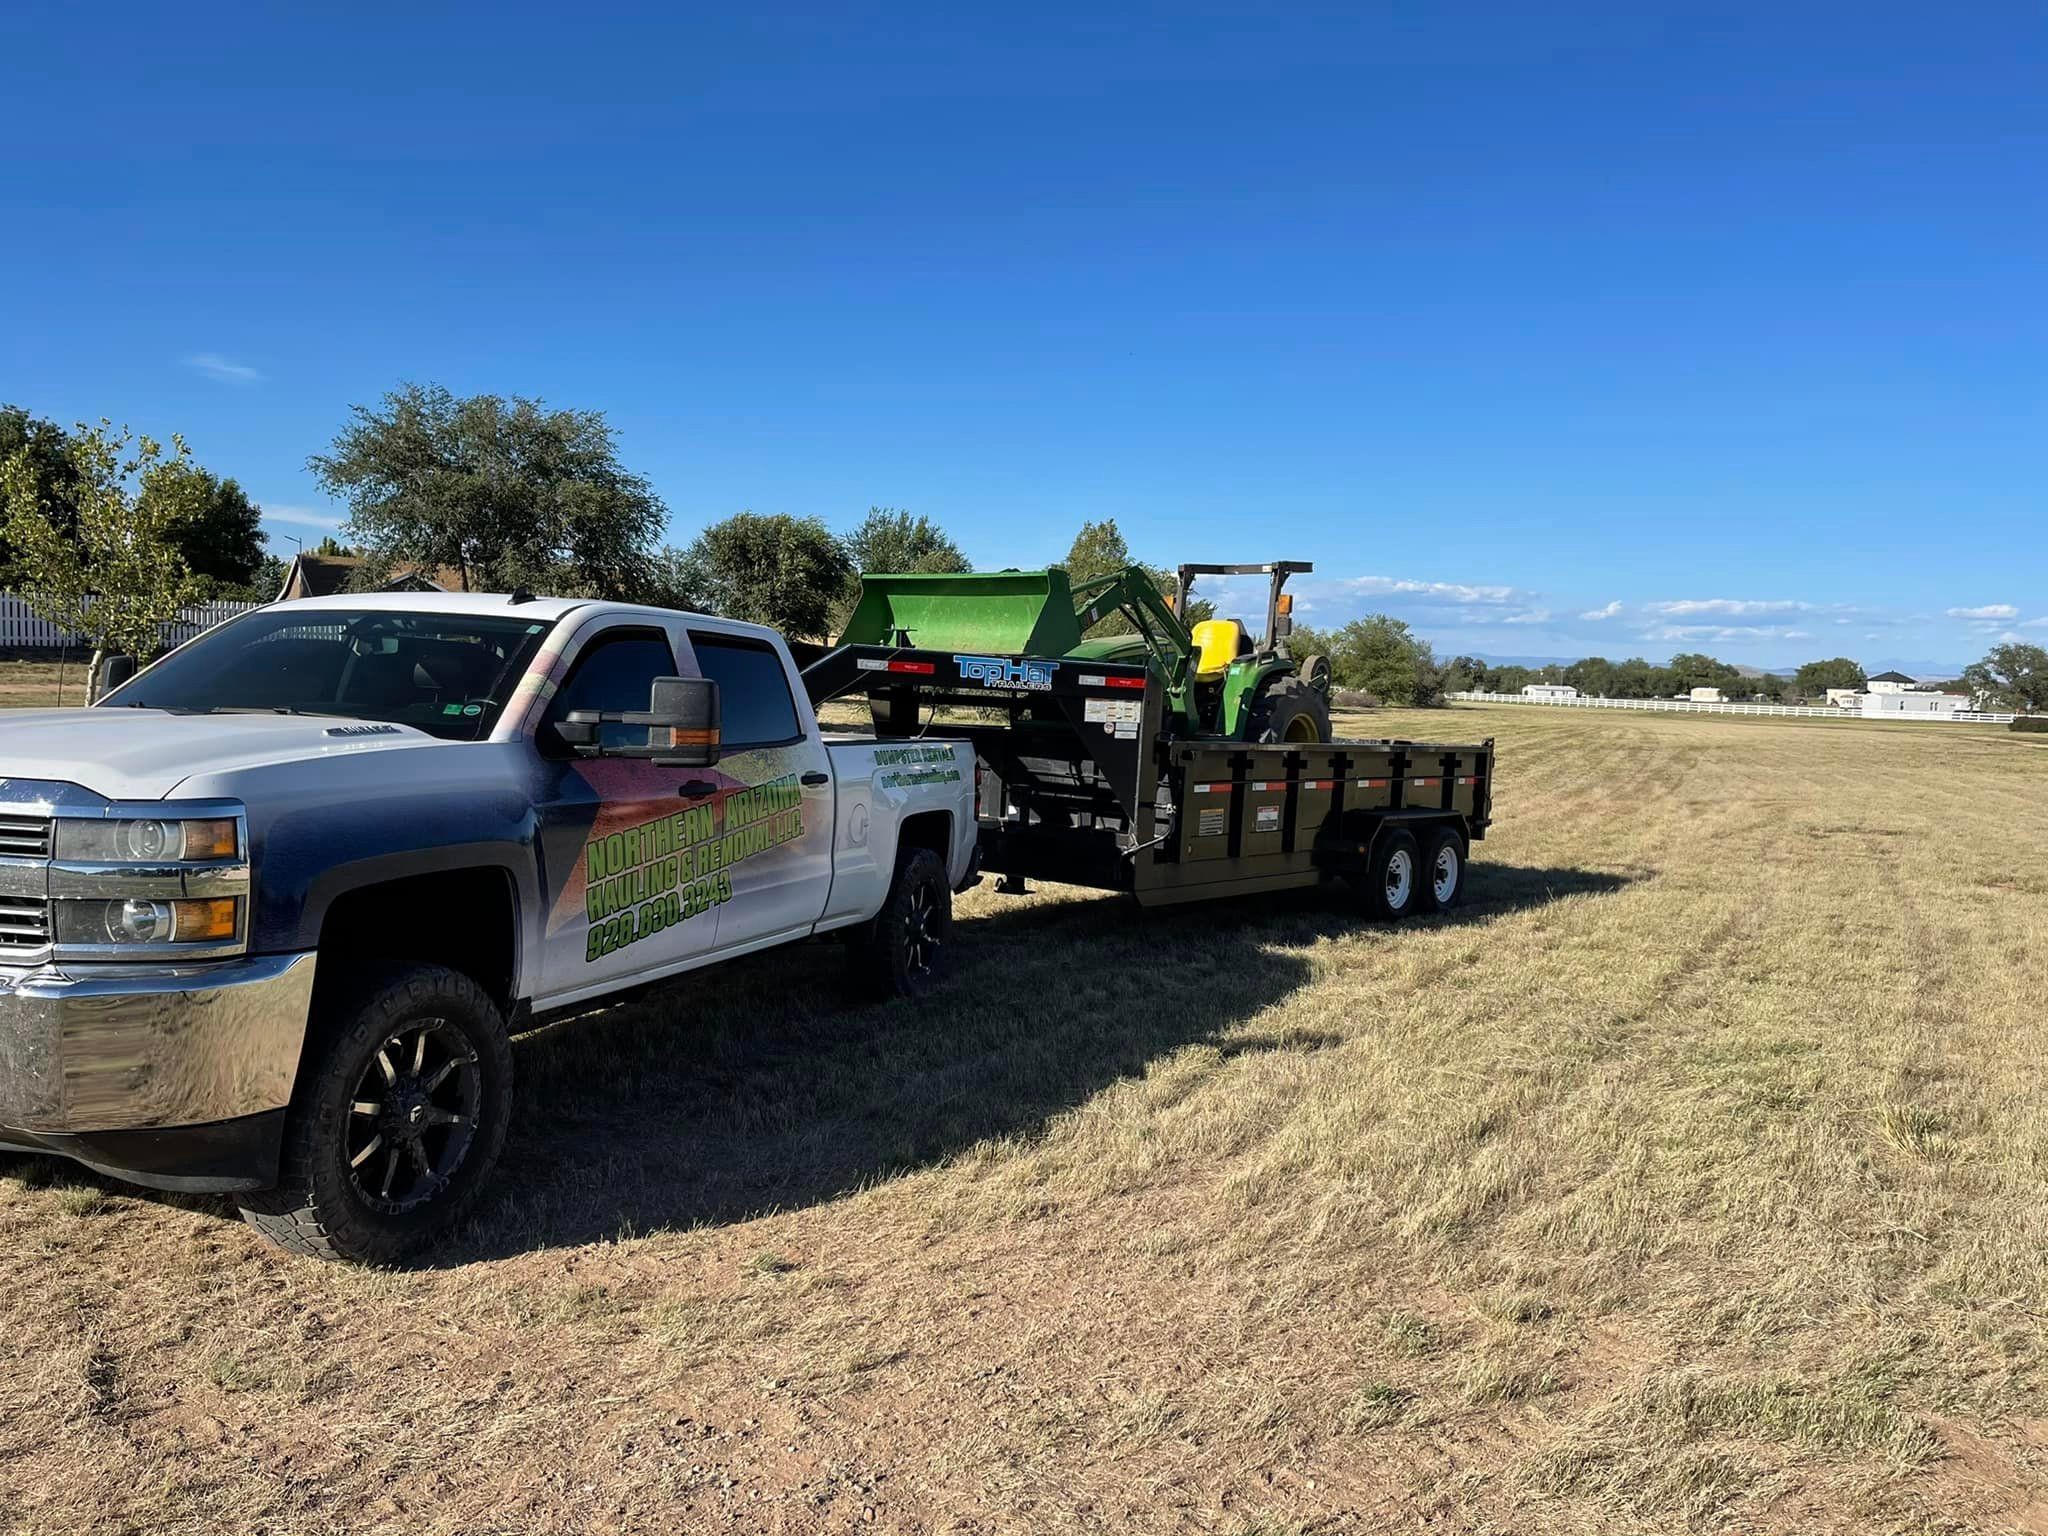 Landscaping Material Hauling for Northern Arizona Hauling and Removal LLC in Prescott, AZ